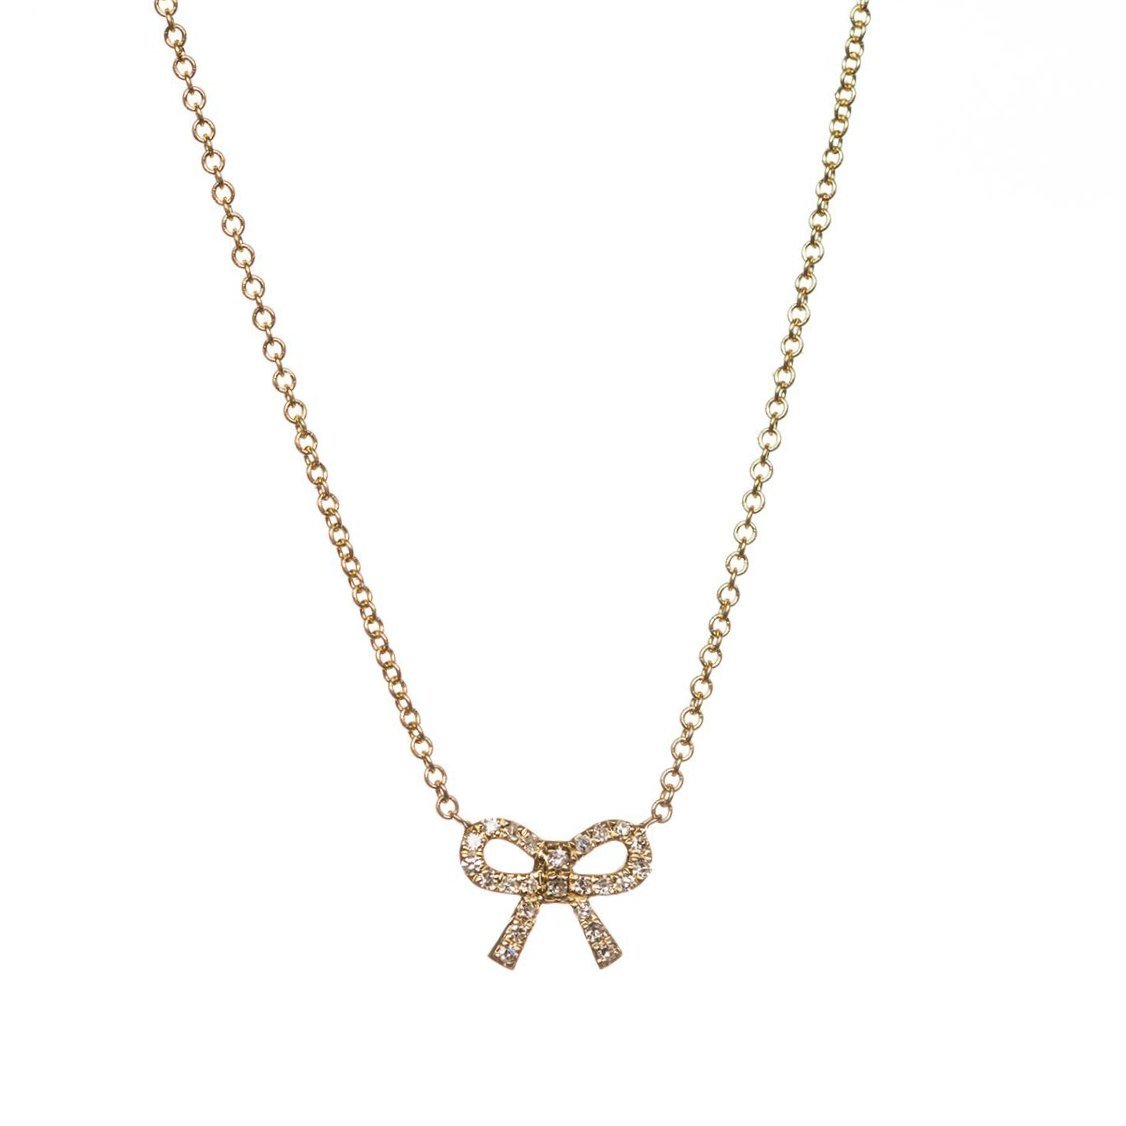 Charlotte Bow Necklace-Necklaces-Zofia Day Co.